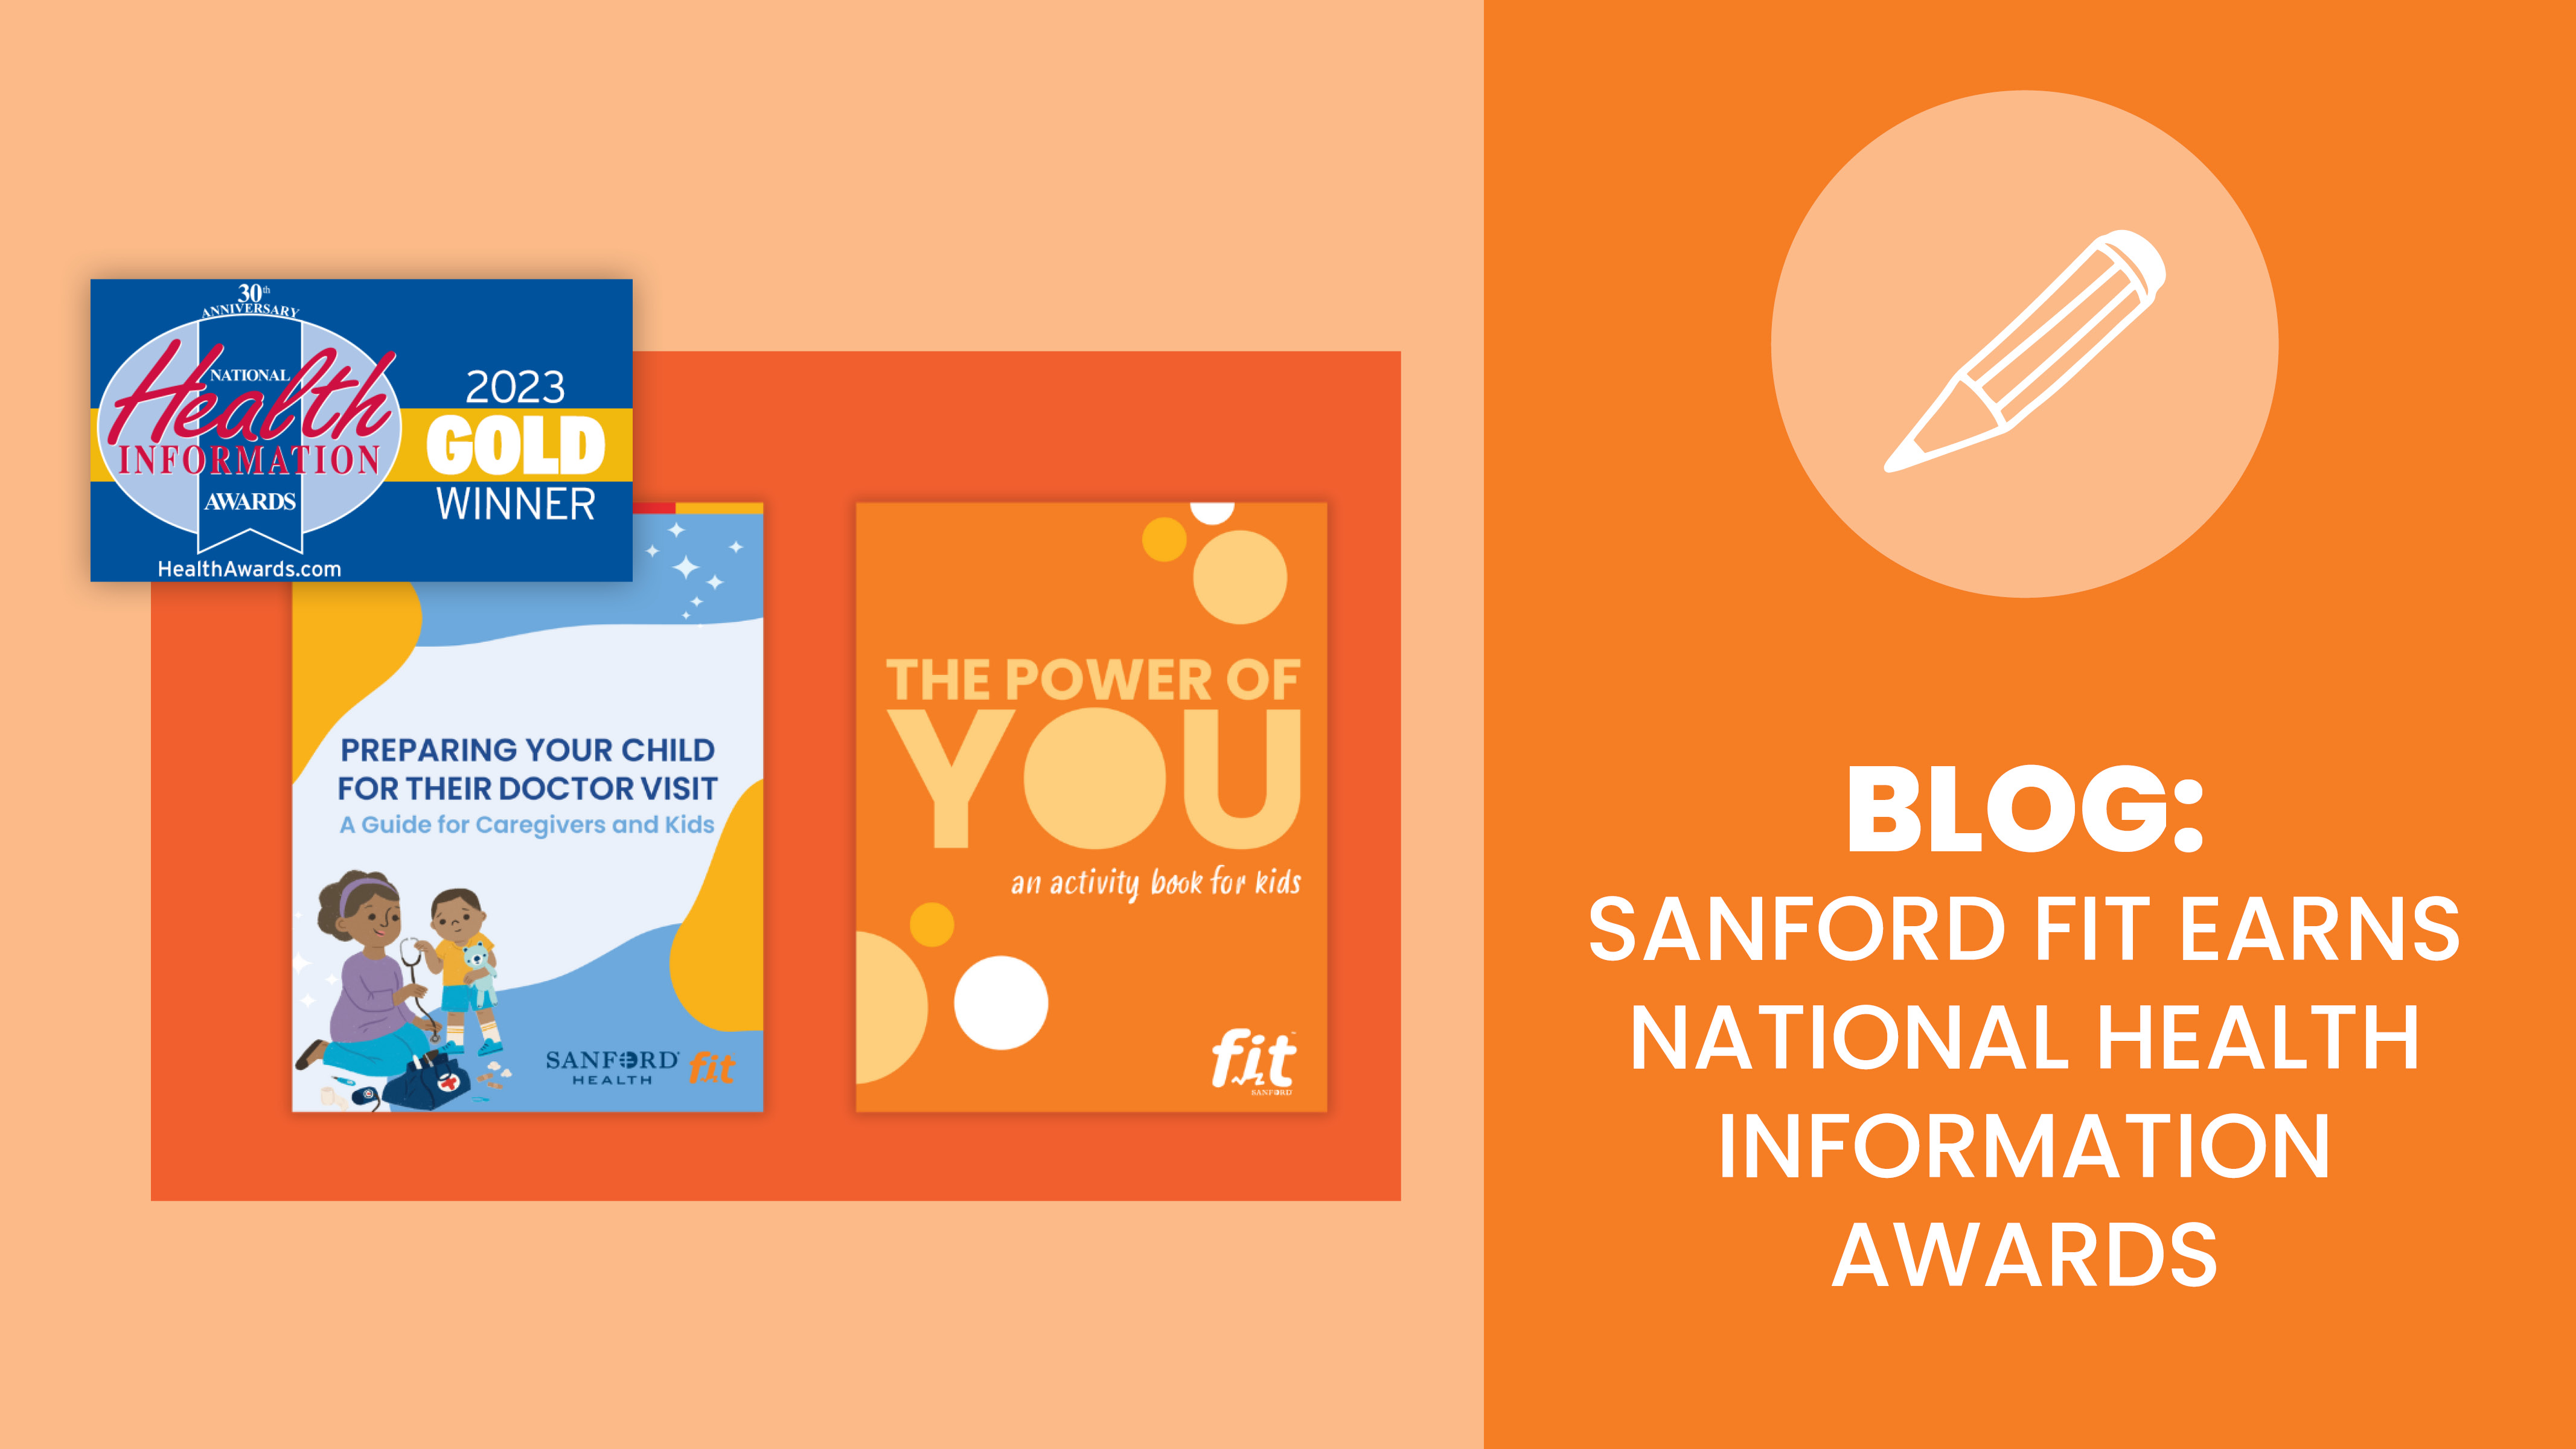 Power of You and Prepping Your Child for the Doctor Activity Kits with Award Banner - Sanford fit